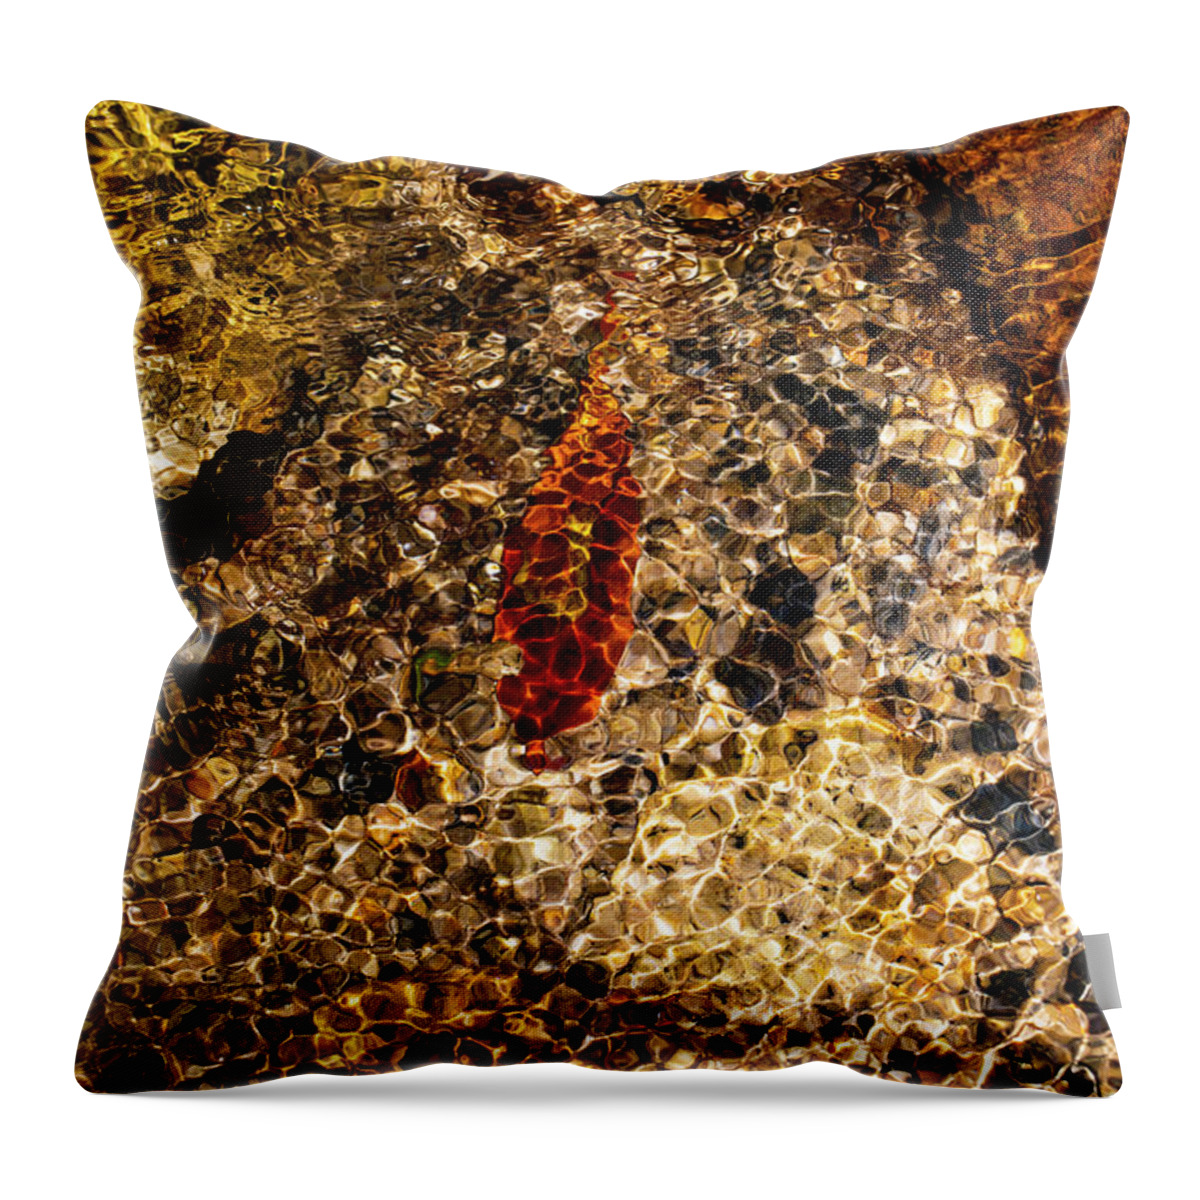 North Carolina (nc) Throw Pillow featuring the photograph Colorful Mountain Creek Bed by Charles Floyd